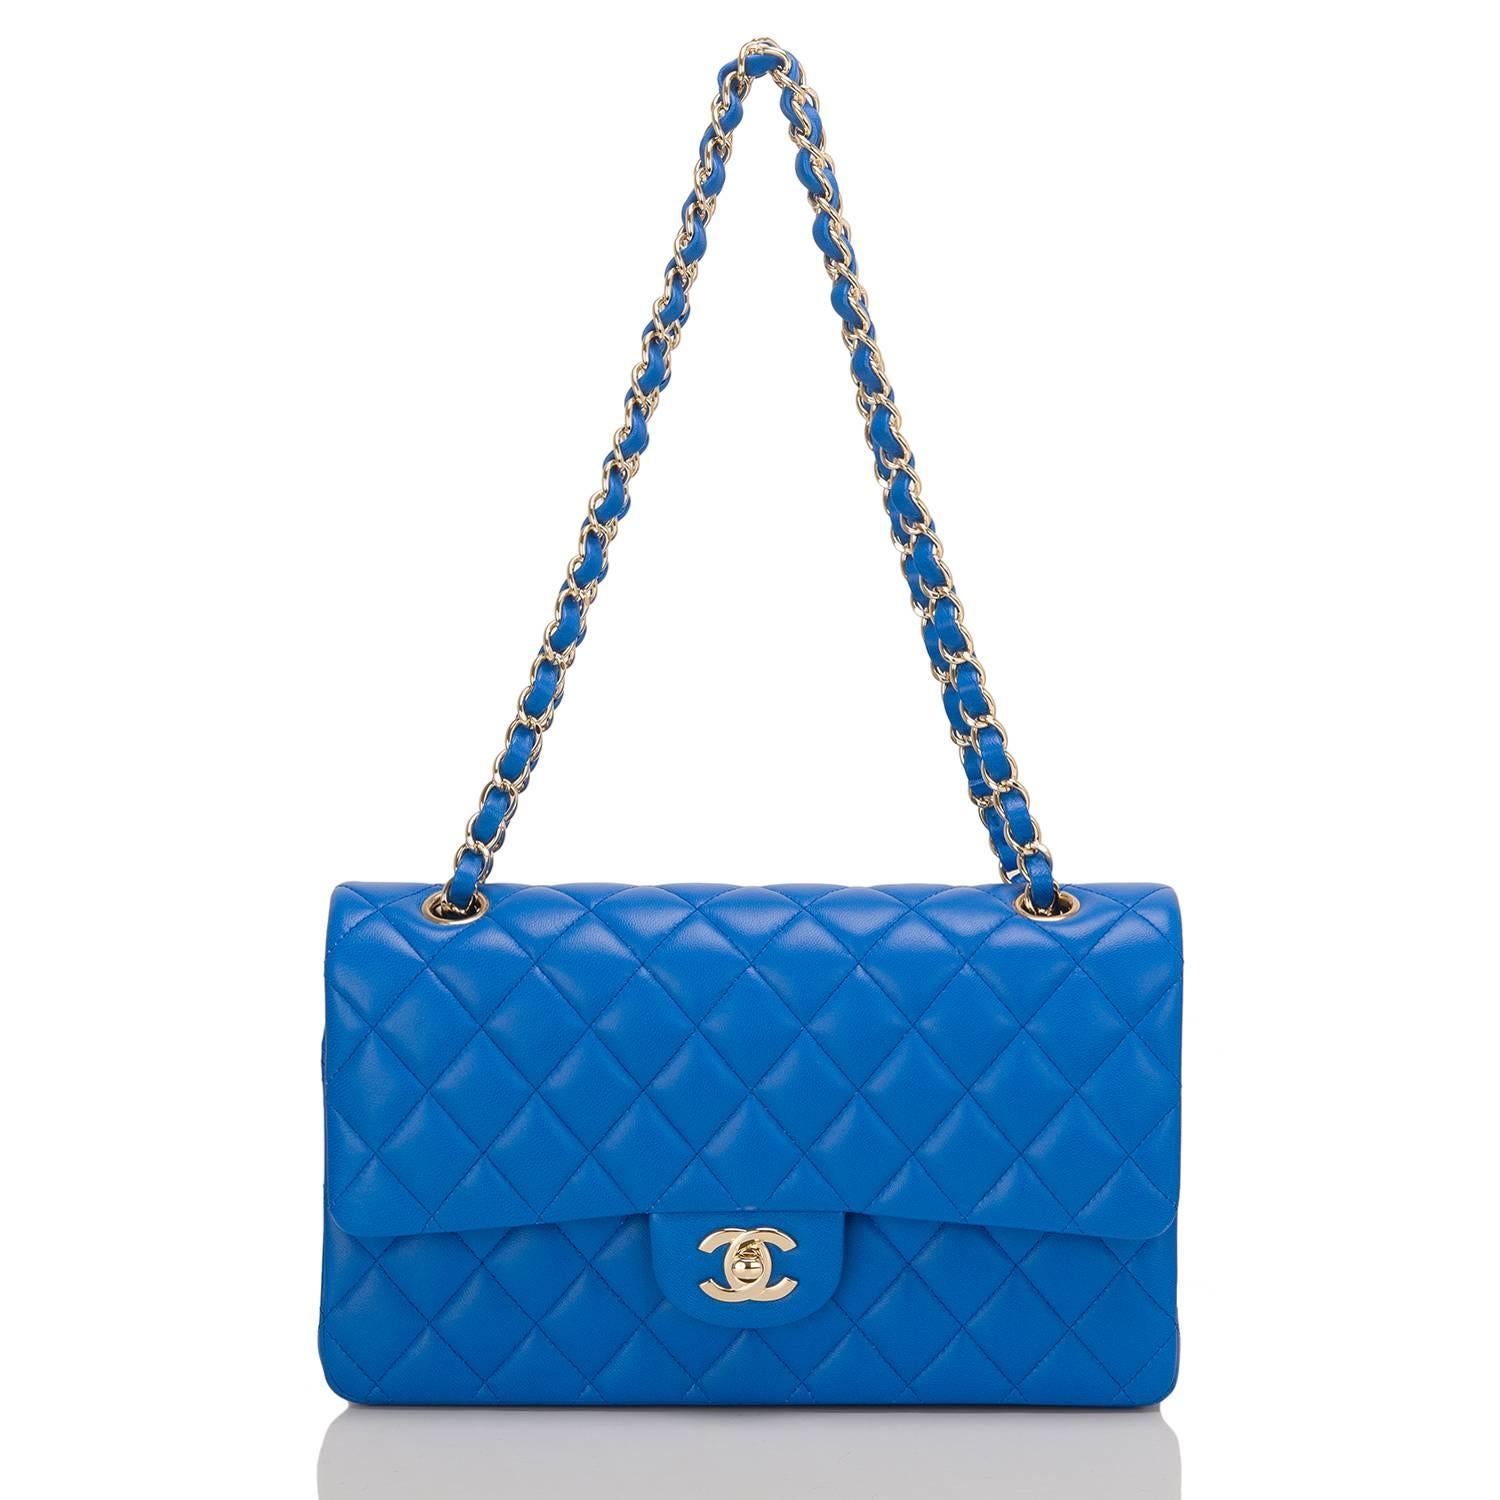 Chanel Blue Quilted Lambskin Medium Double Flap Bag For Sale 1